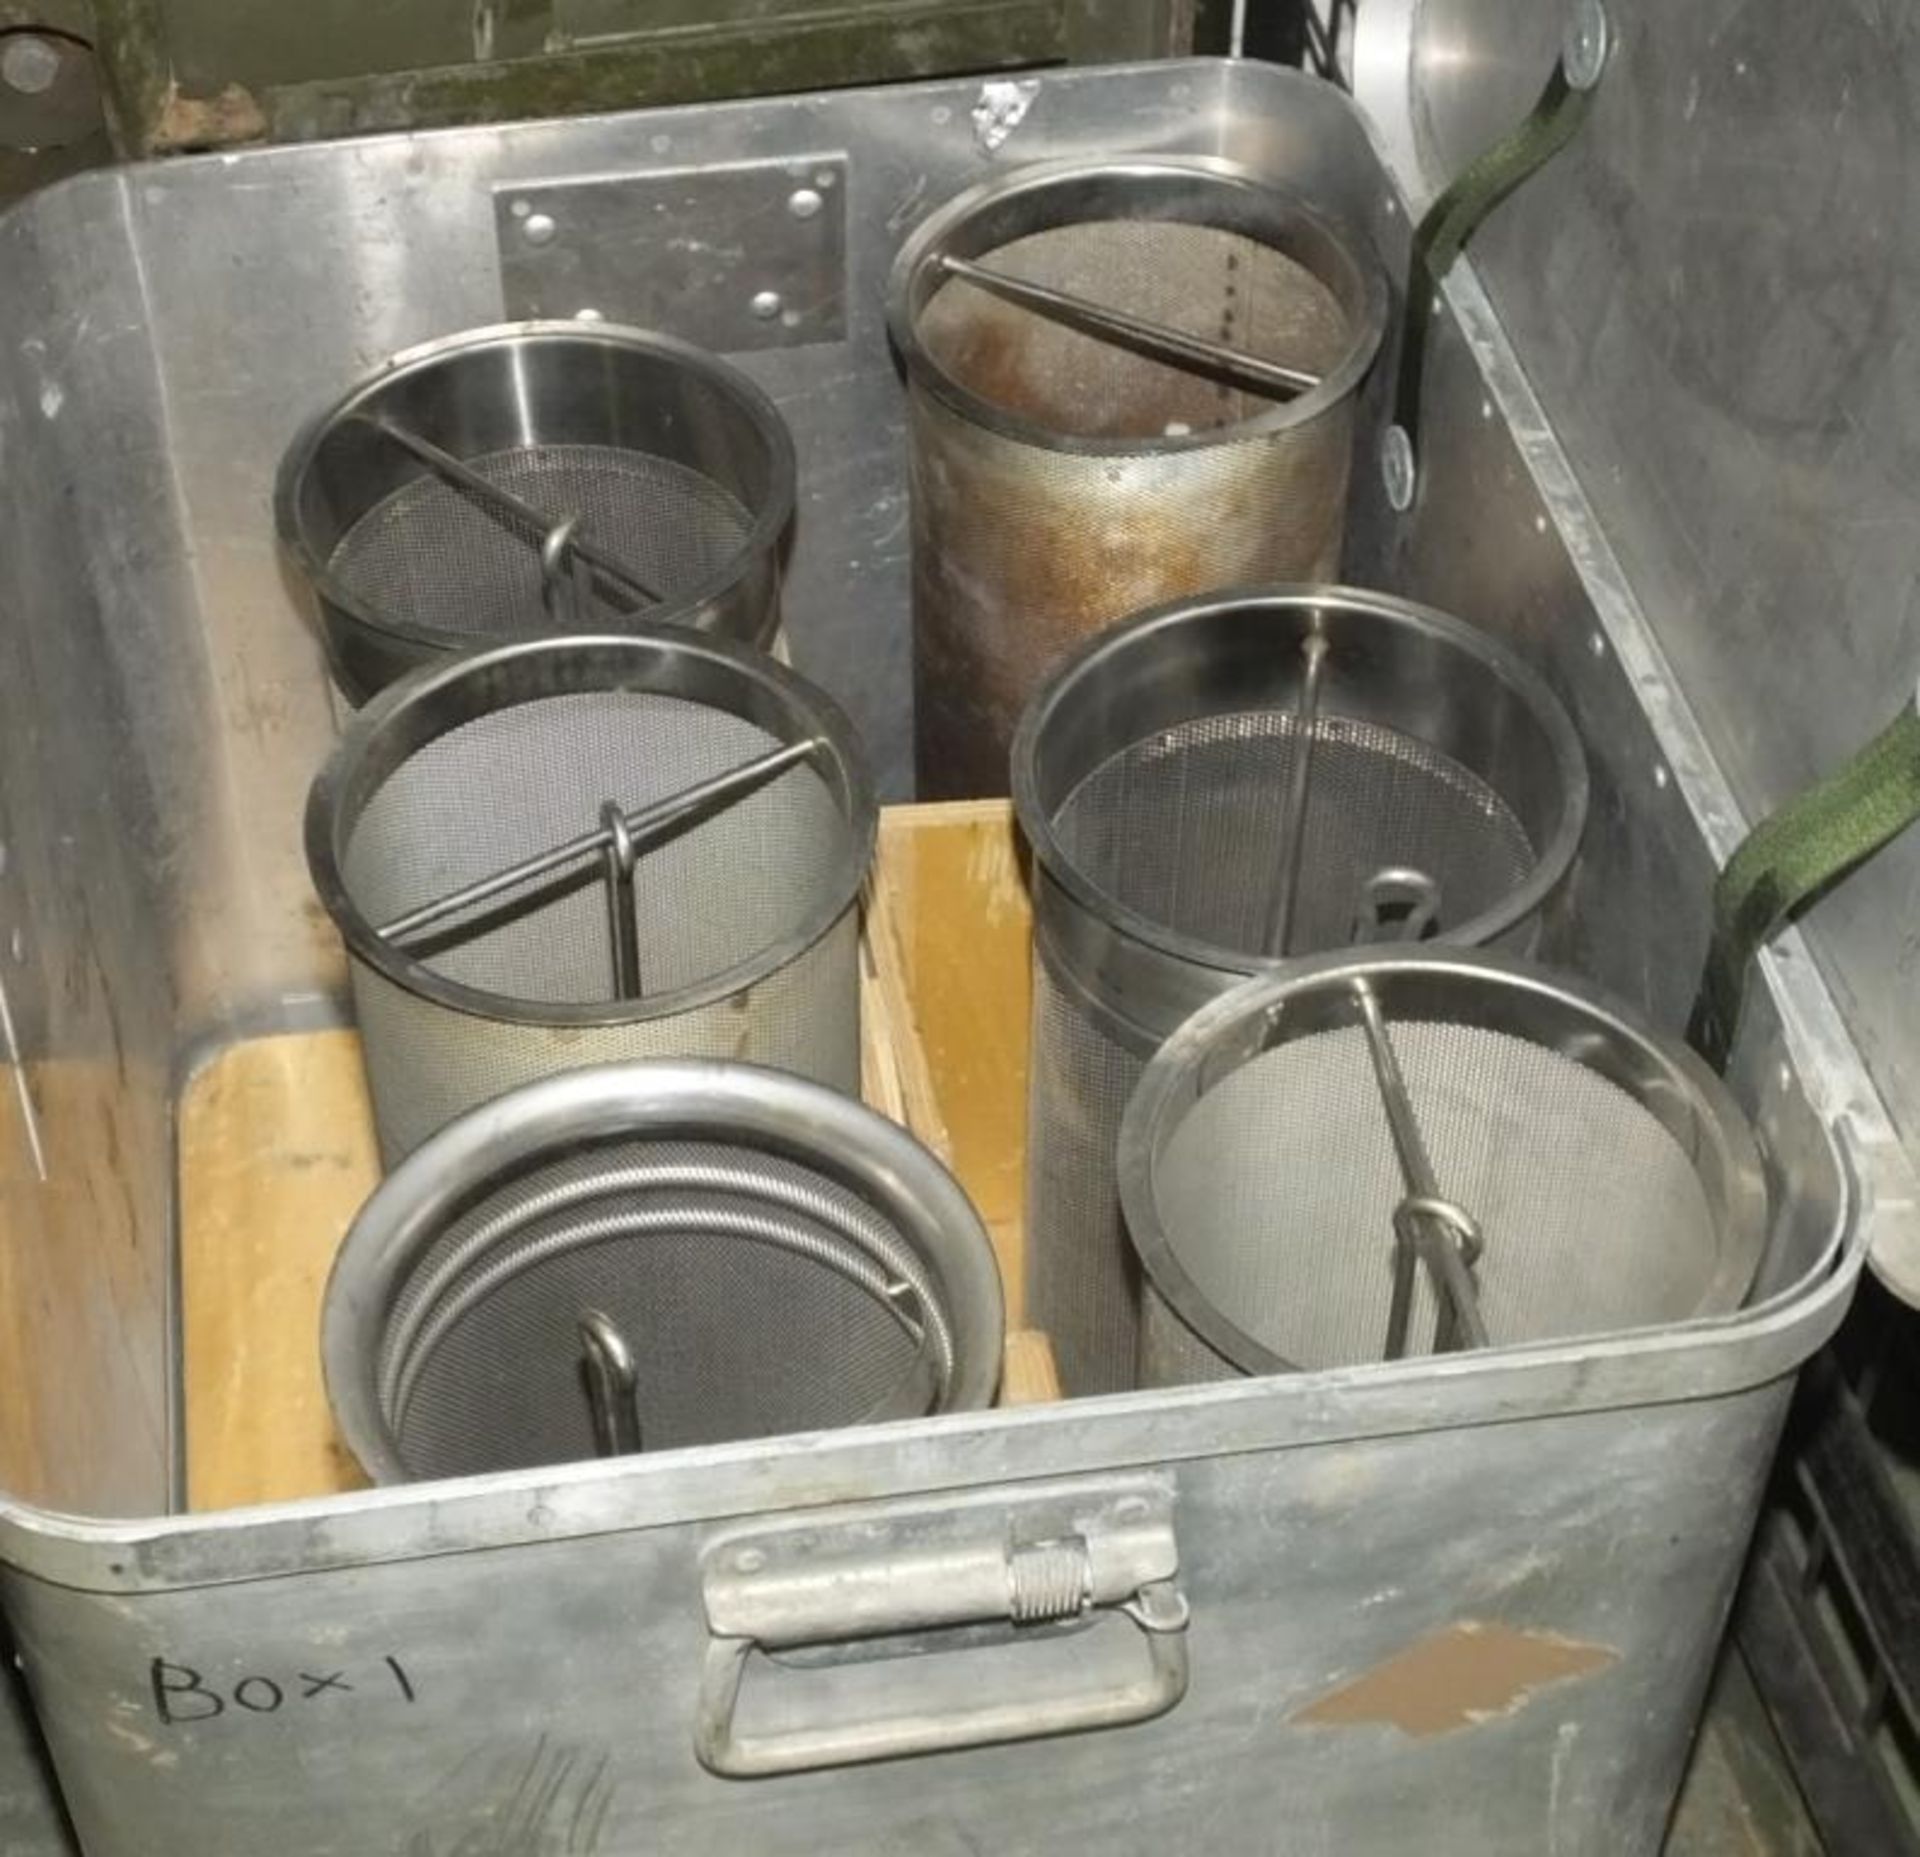 Field Kitchen set - cooker, oven, sieve set in carry box, norweigen food boxes - Image 4 of 4